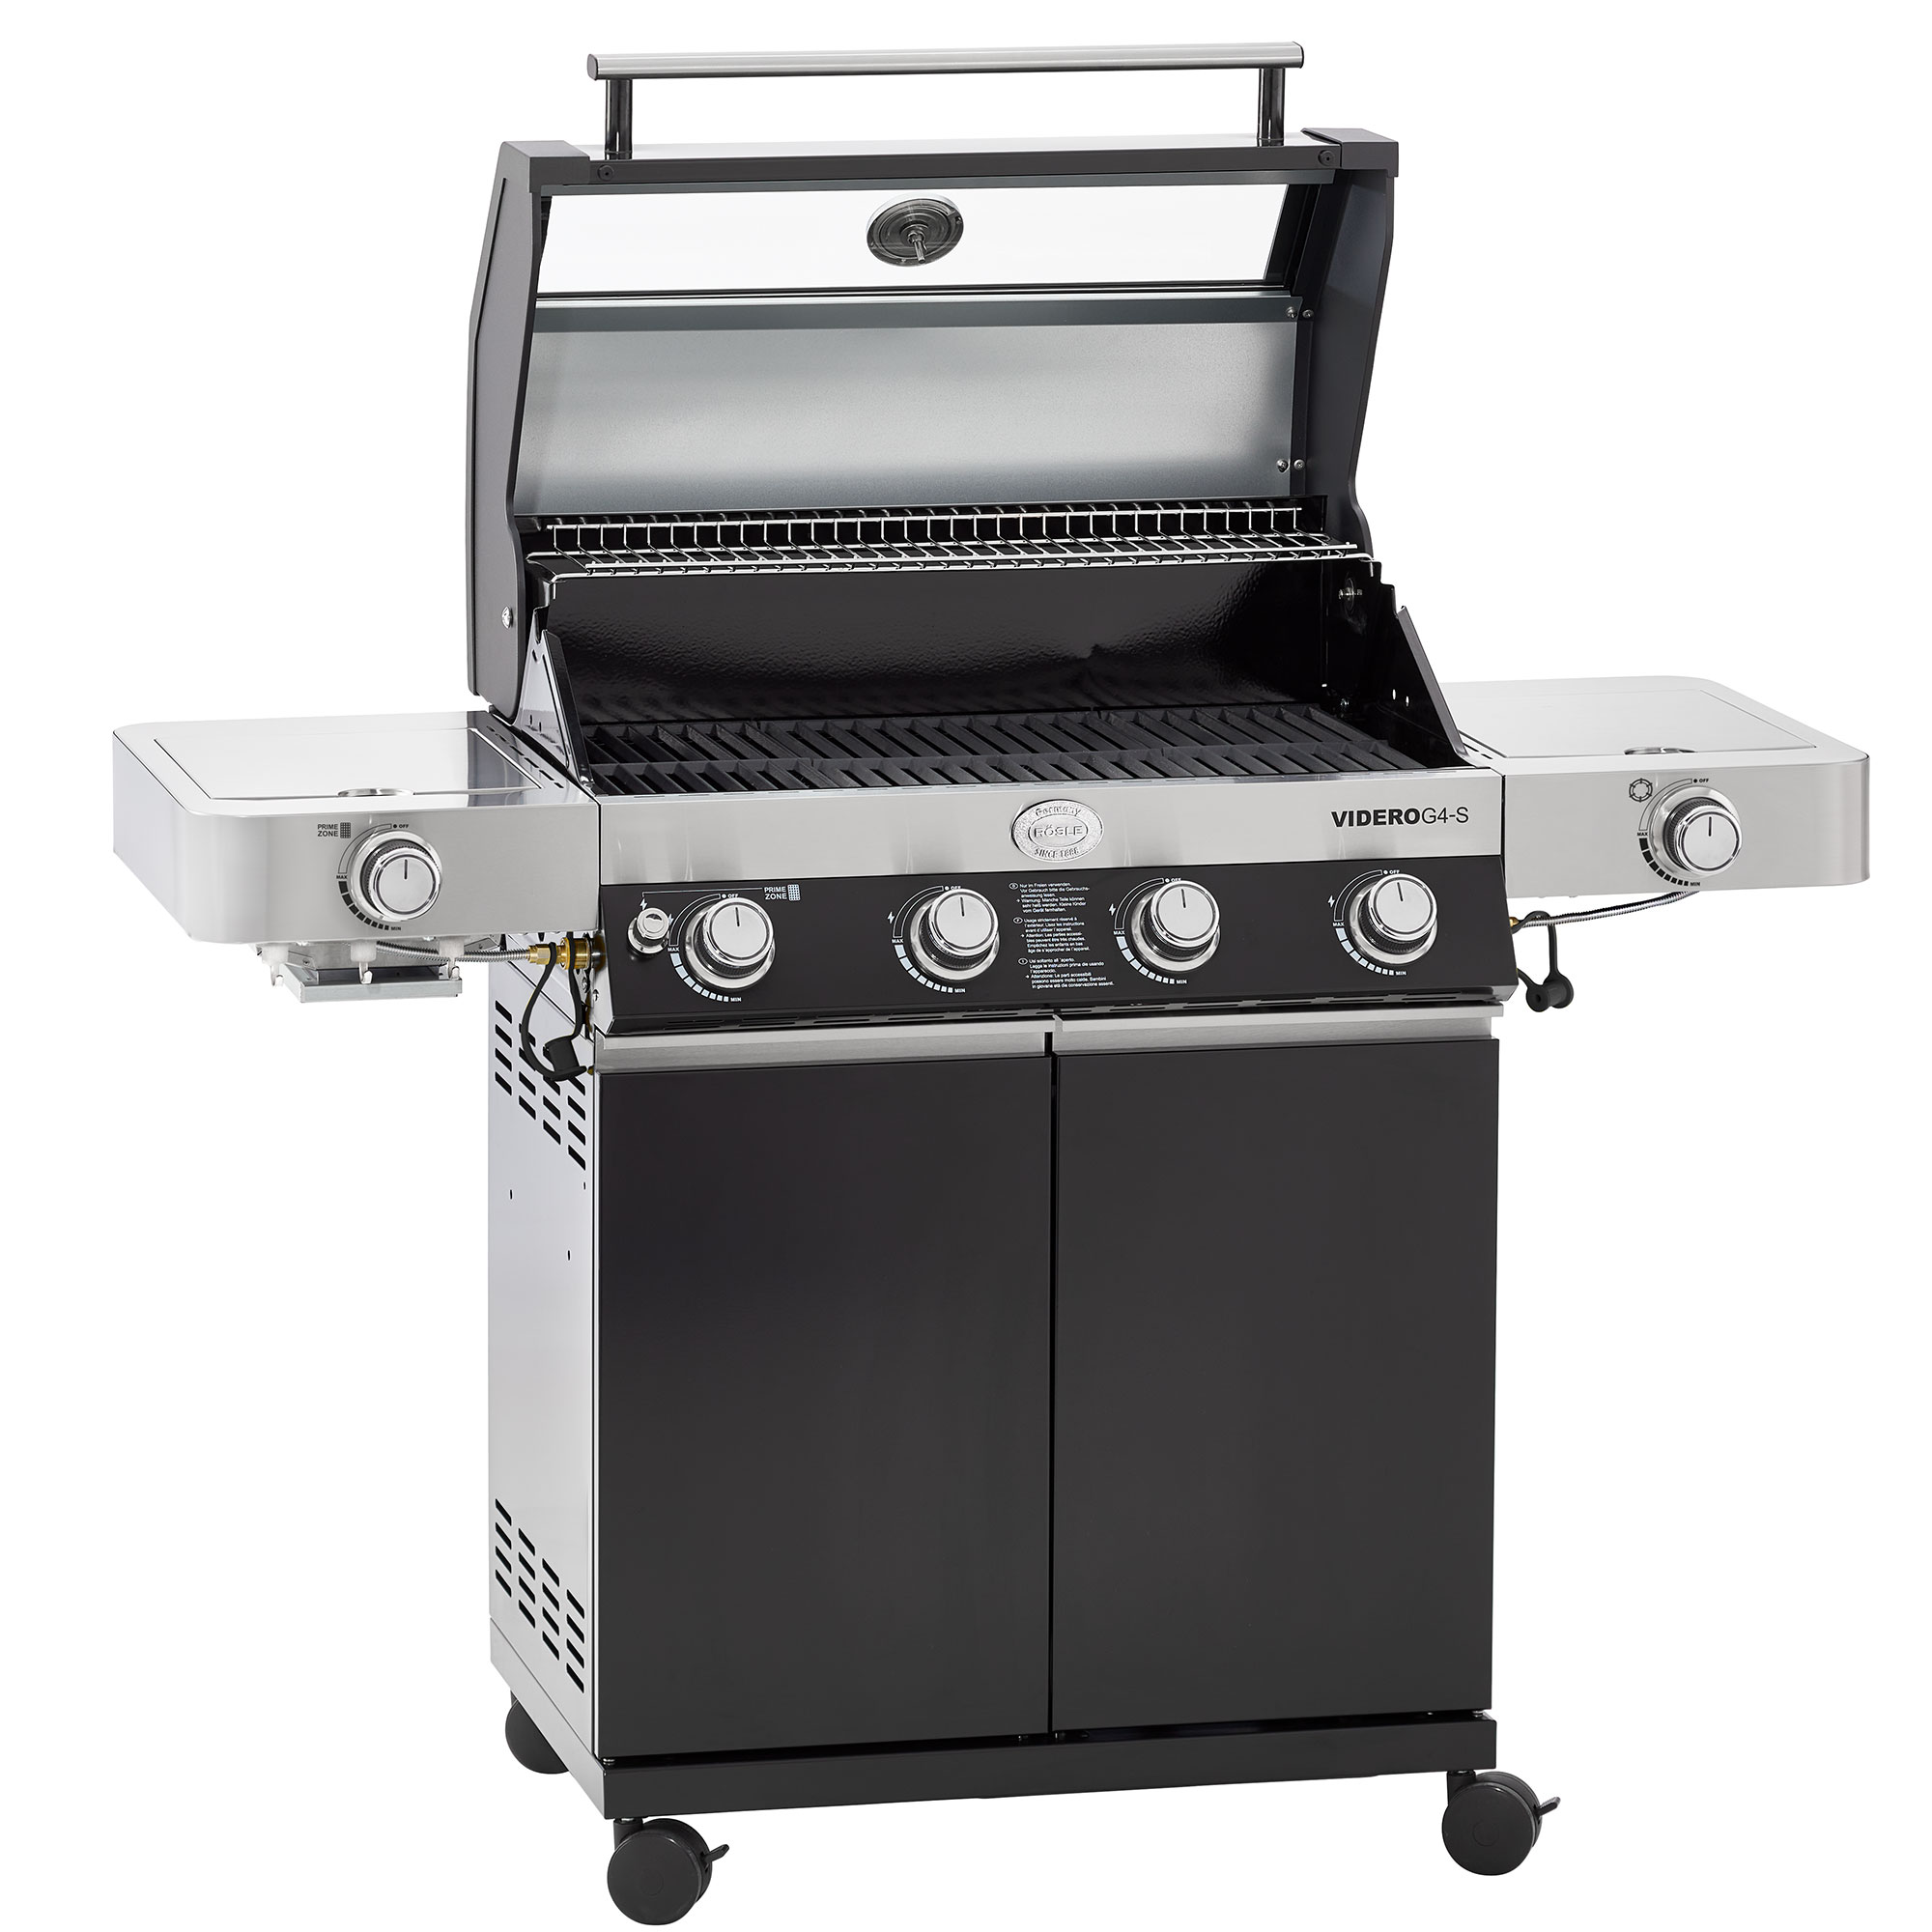 Gas grill BBQ-Station Videro G4-S Vario + 50 mbar incl. Cover